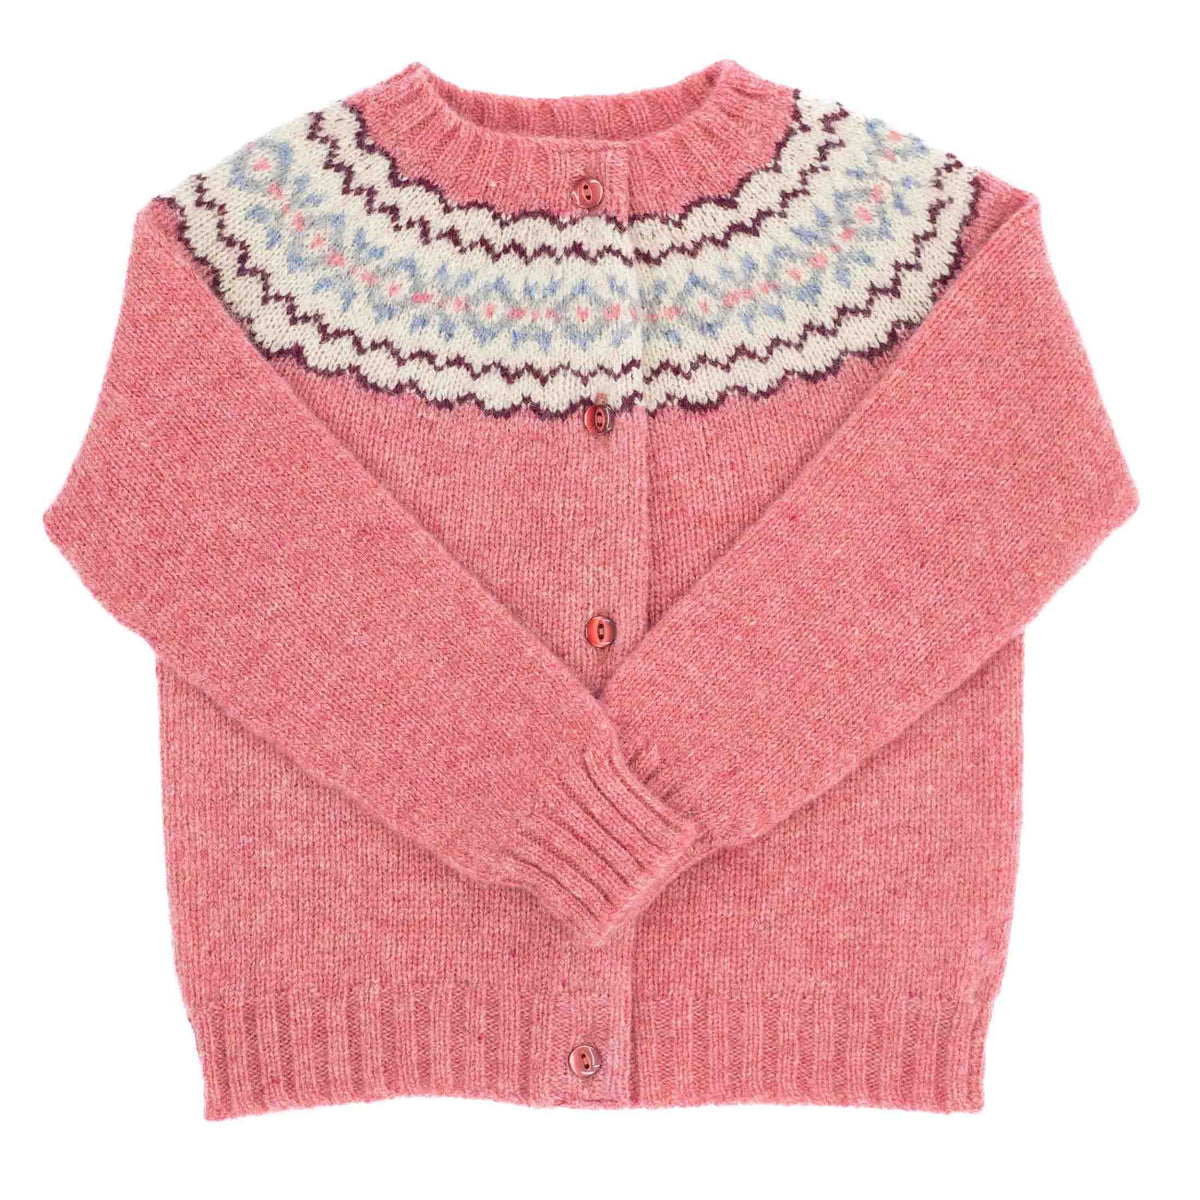 Childrens Jumpers and Cardigans